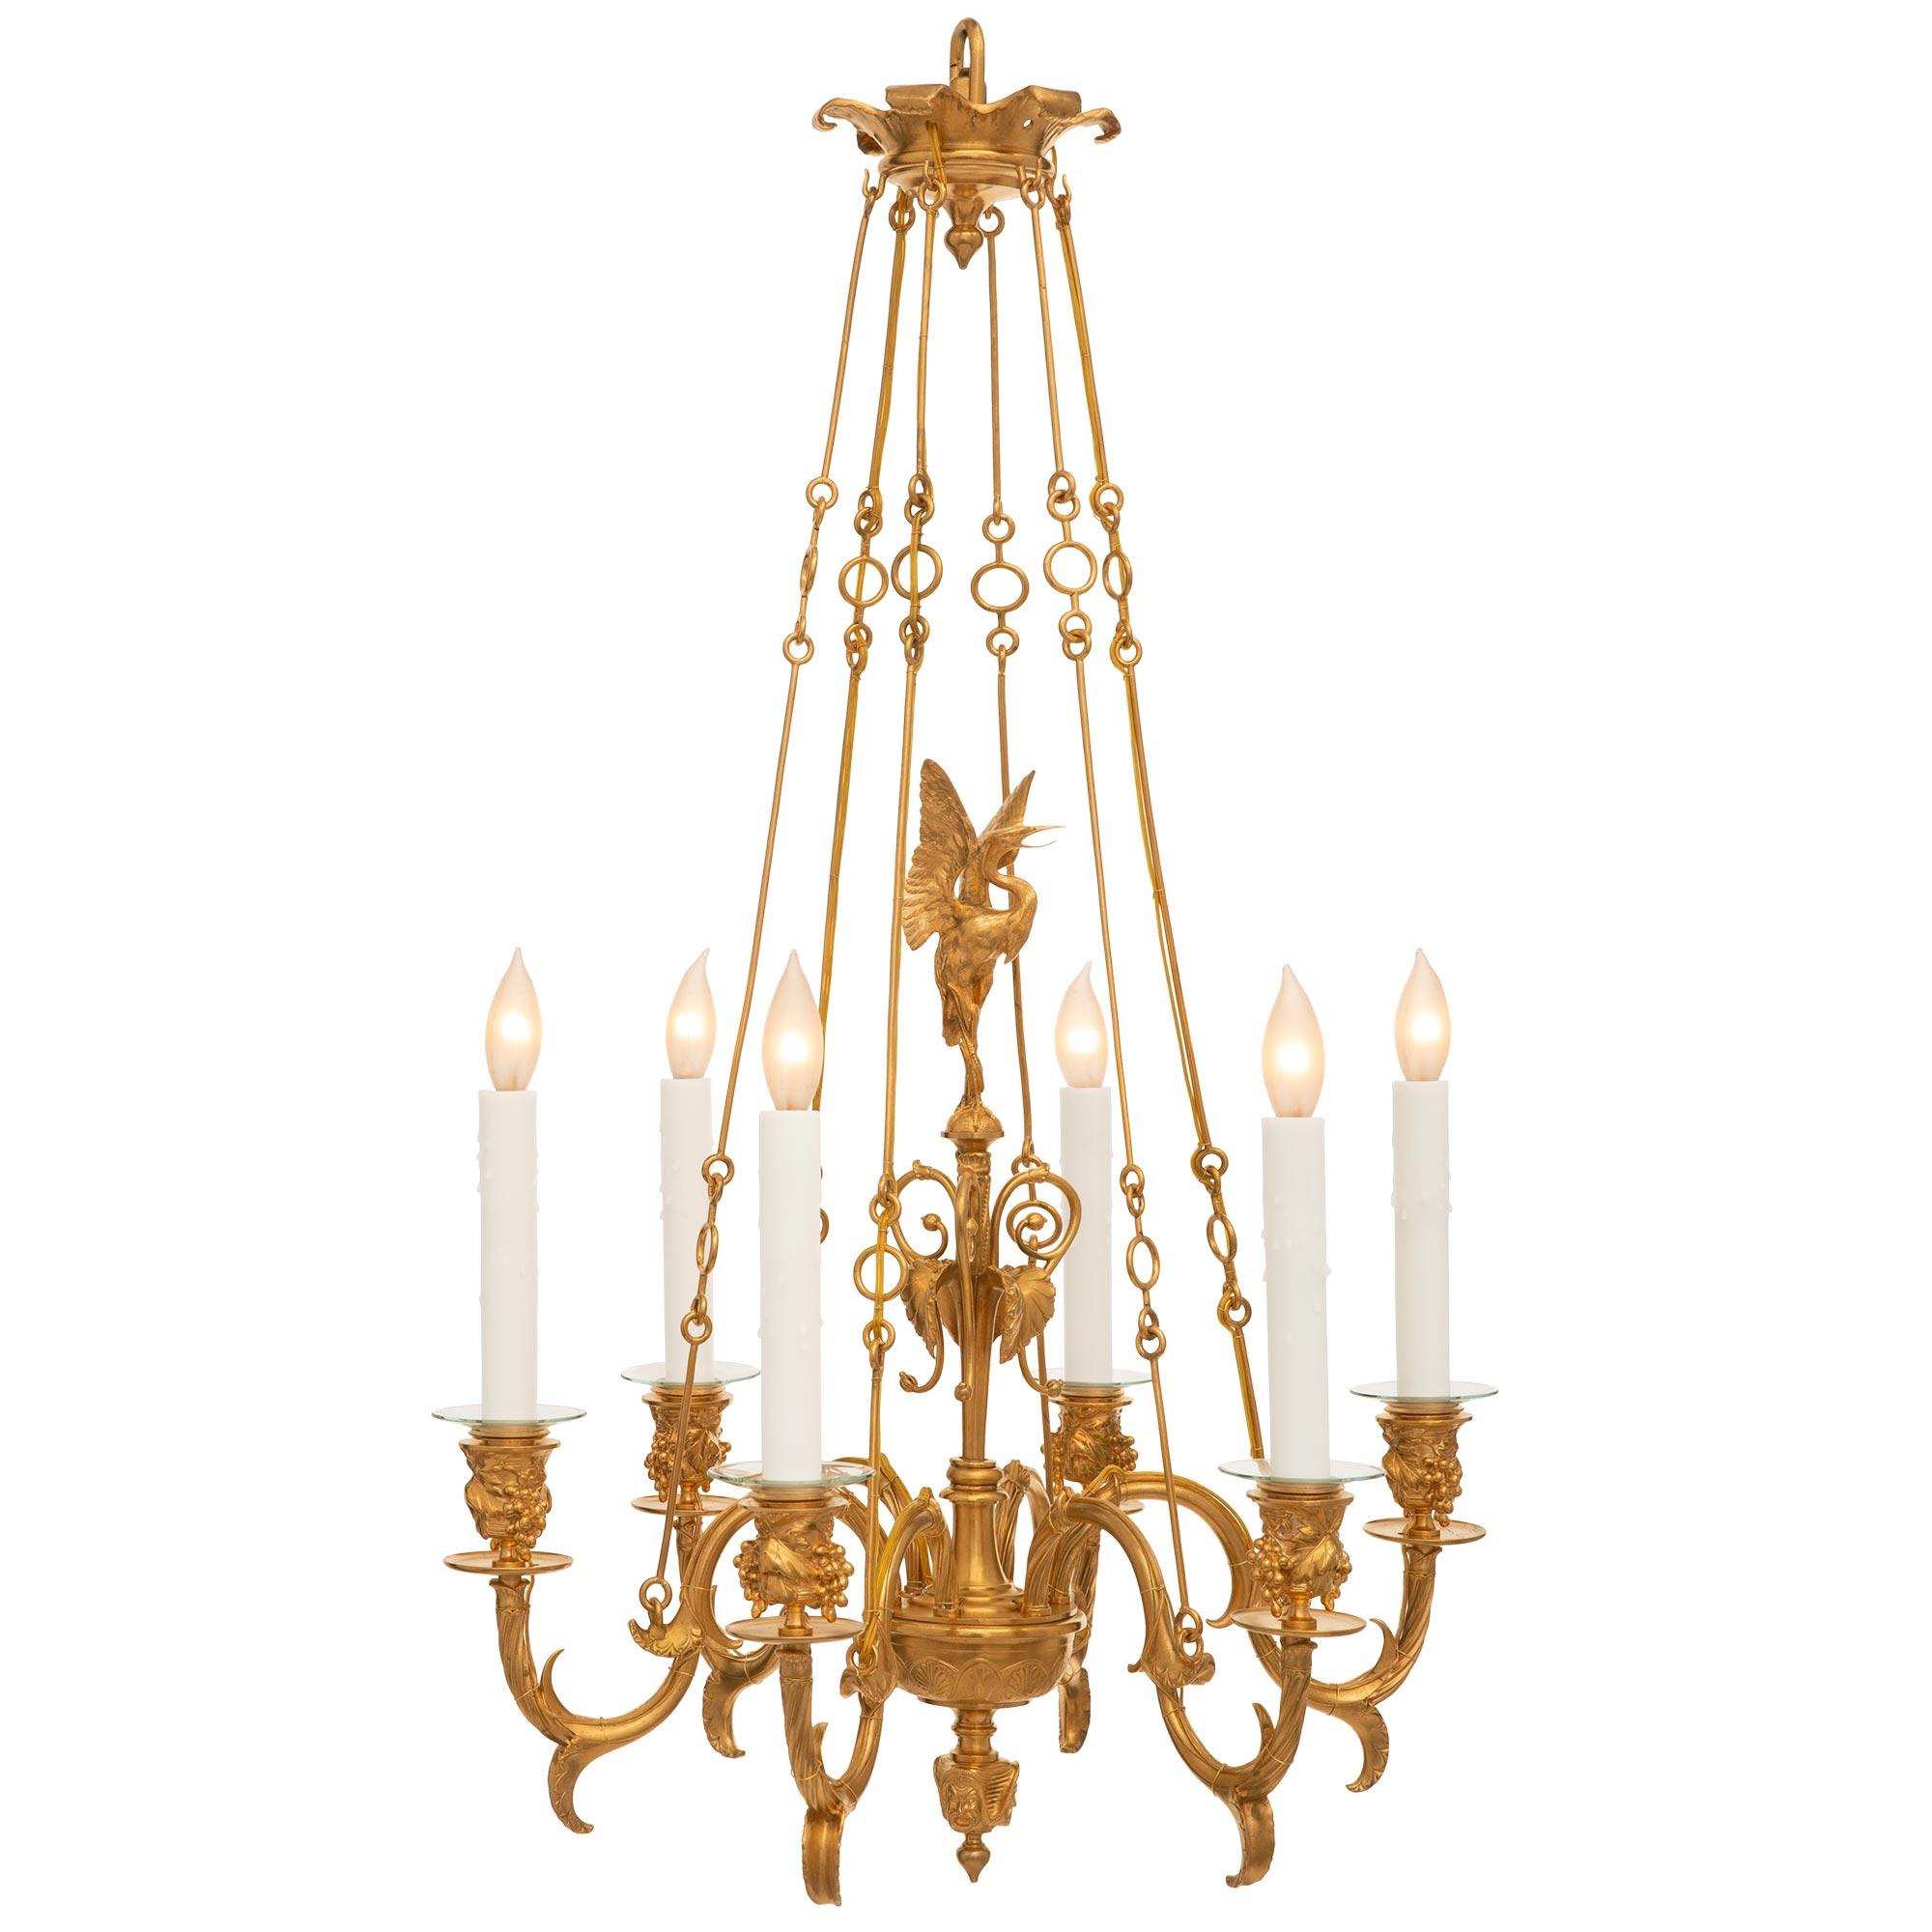 An elegant and high quality French 19th century Renaissance st. Ormolu five arm chandelier possibly by F. Barbedienne. The chandelier is centered by a most unique bottom finial with richly chased faces below beautiful interlocking palmettes designs.